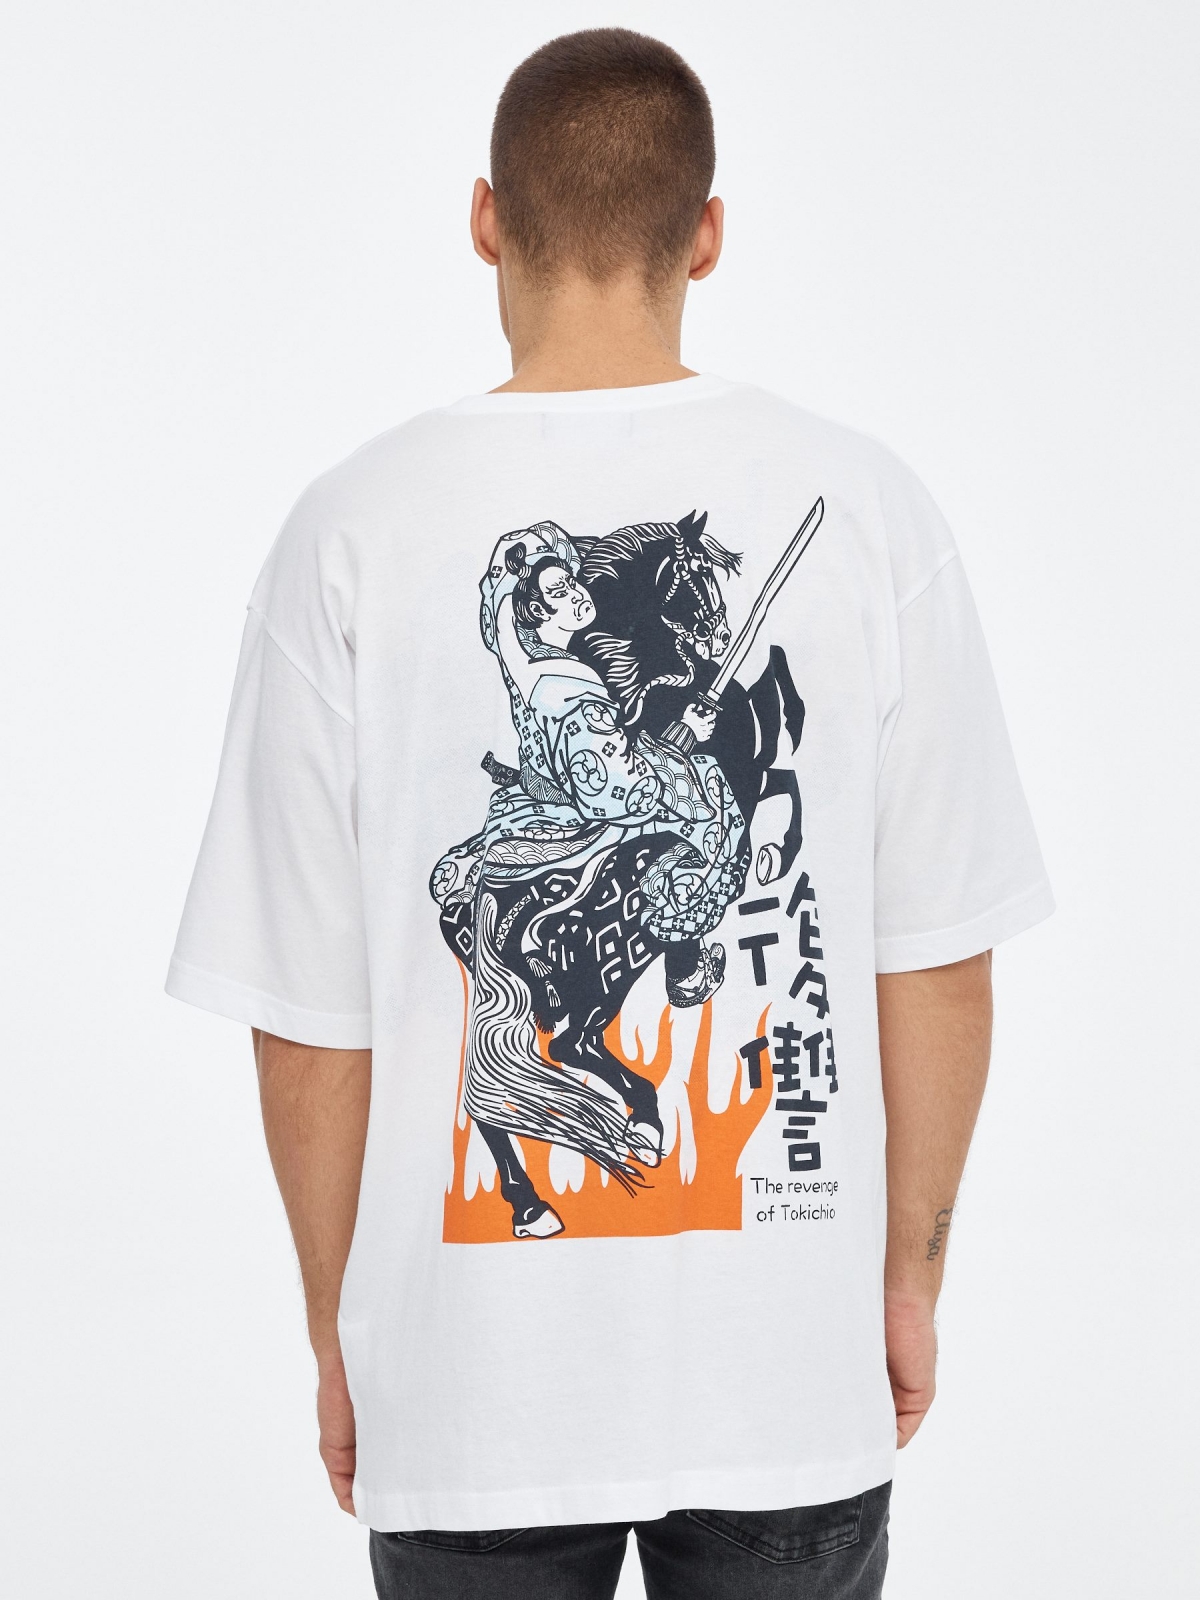 Japanese printed T-shirt white middle back view